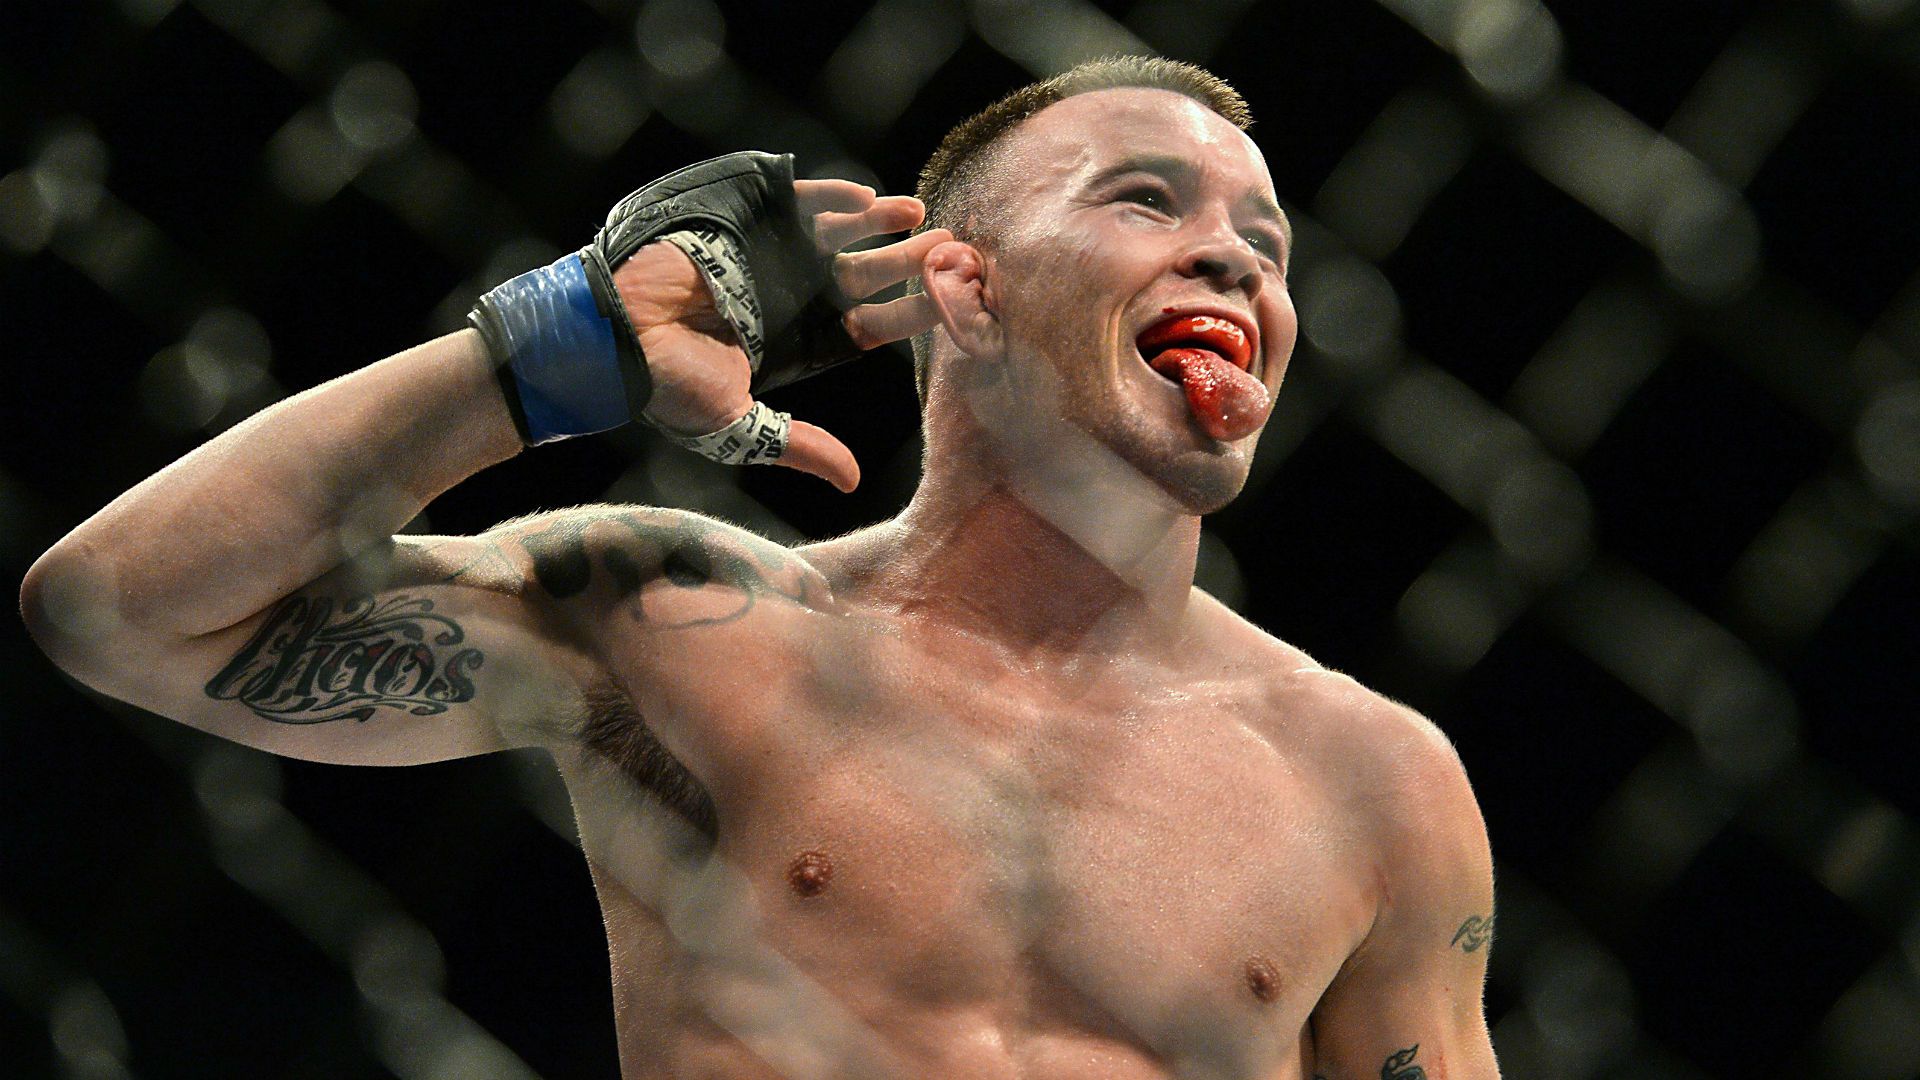 Colby Covington: "I would drag Poirier by his underpants all over the octagon until he gives up". Video